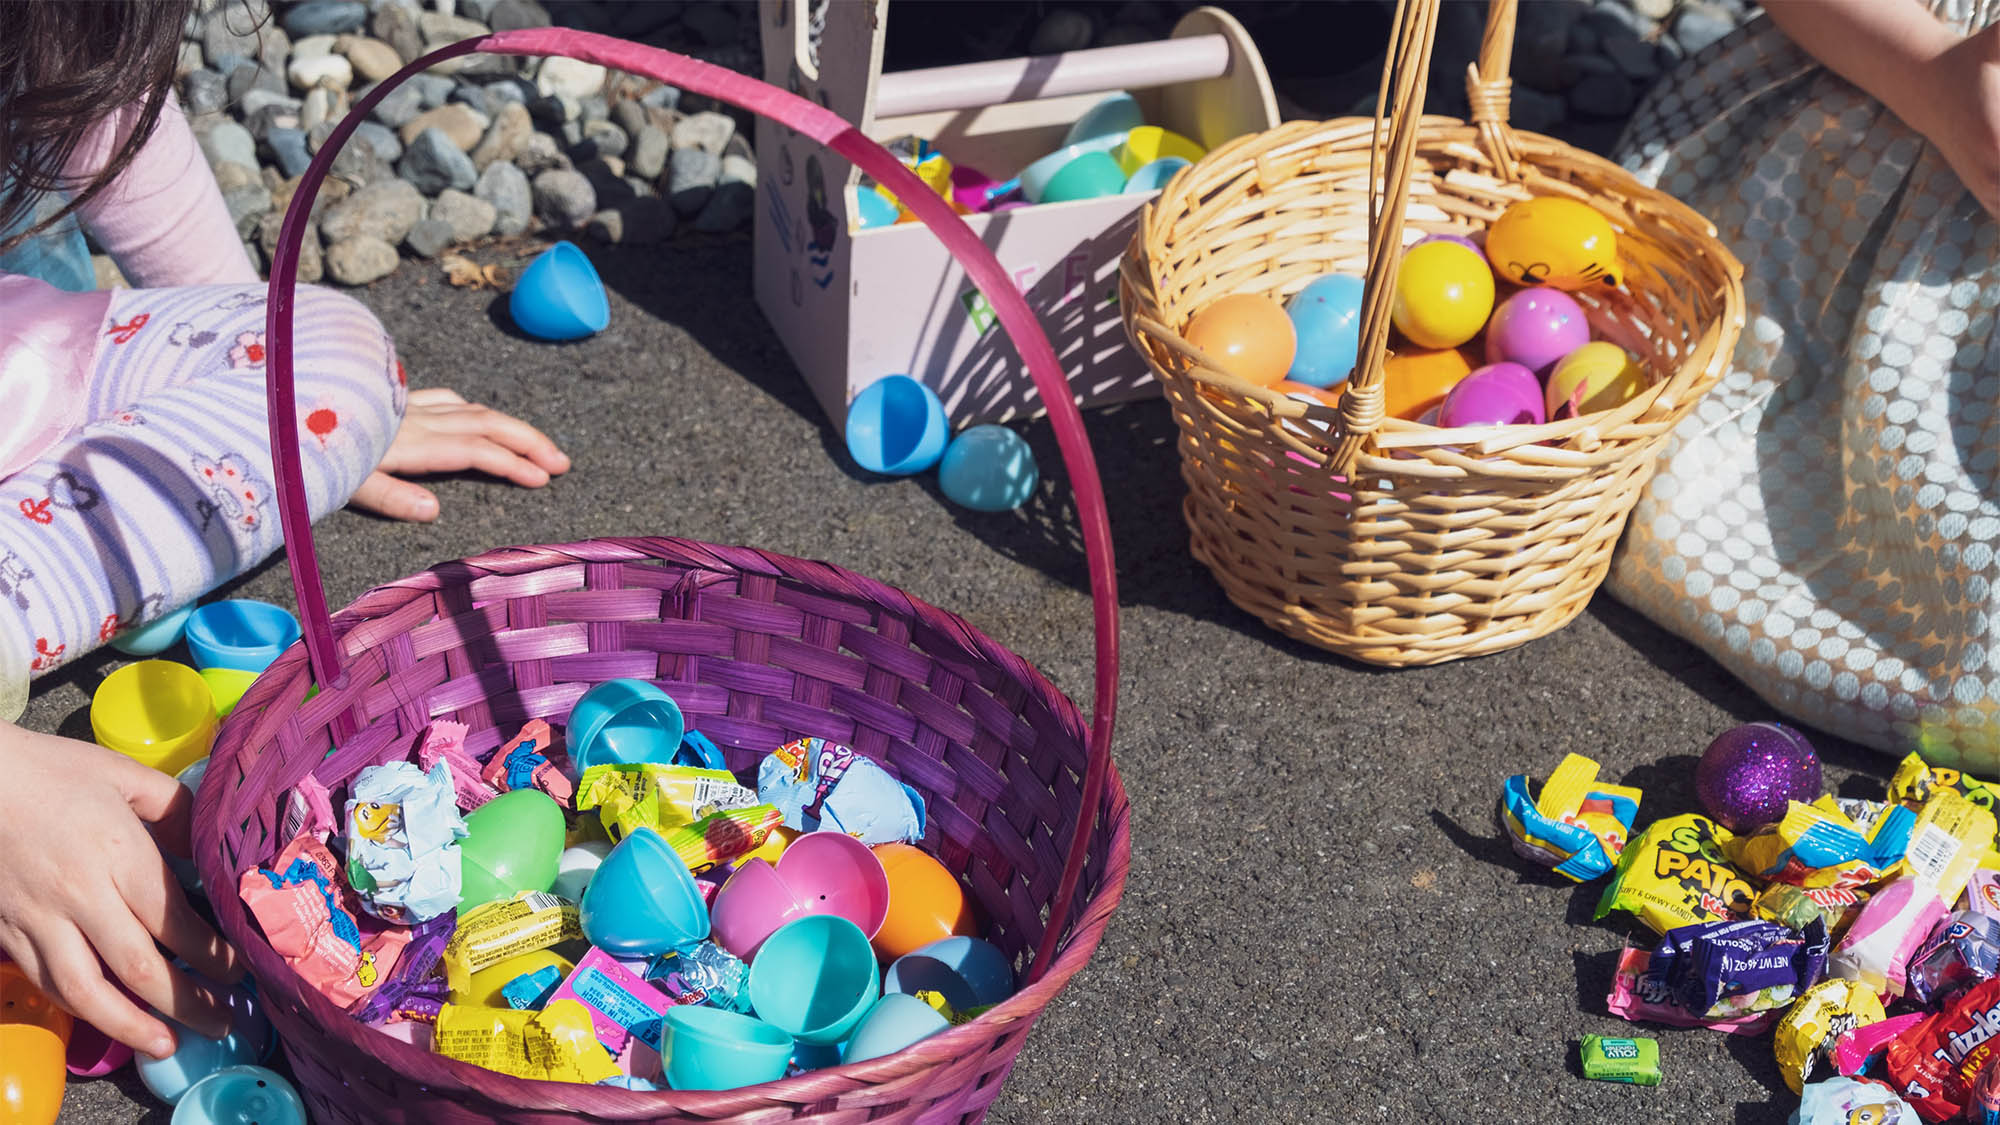 Two Easter baskets filled with assorted plastic eggs and candies